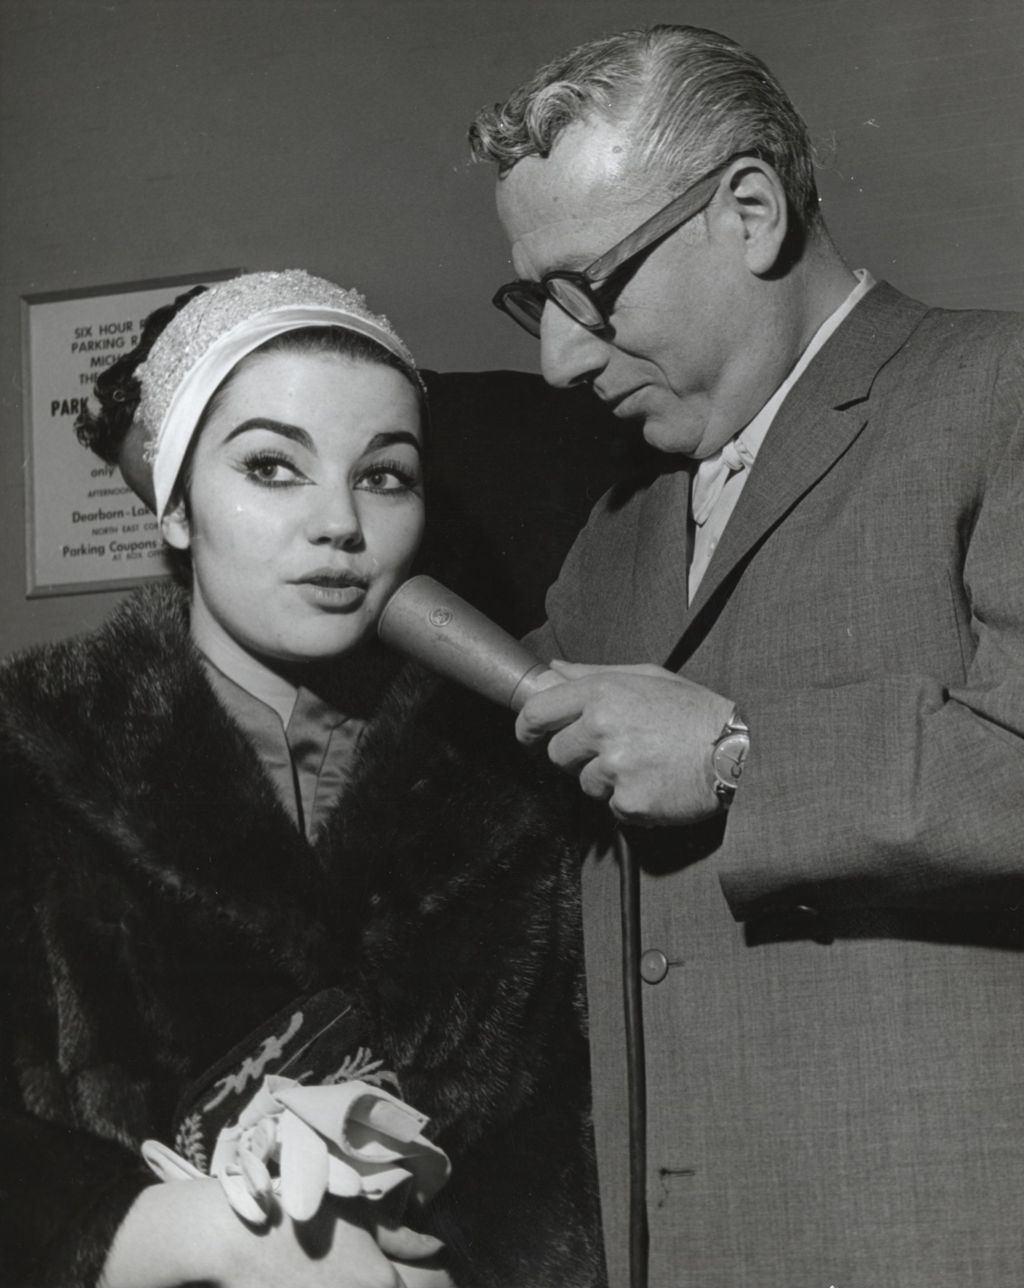 Miniature of Radio host Jack Eigen interviewing actress Brigit Bazlen at the Chicago premiere of the film West Side Story at the Michael Todd Theatre. The premiere was a benefit for Hull-House